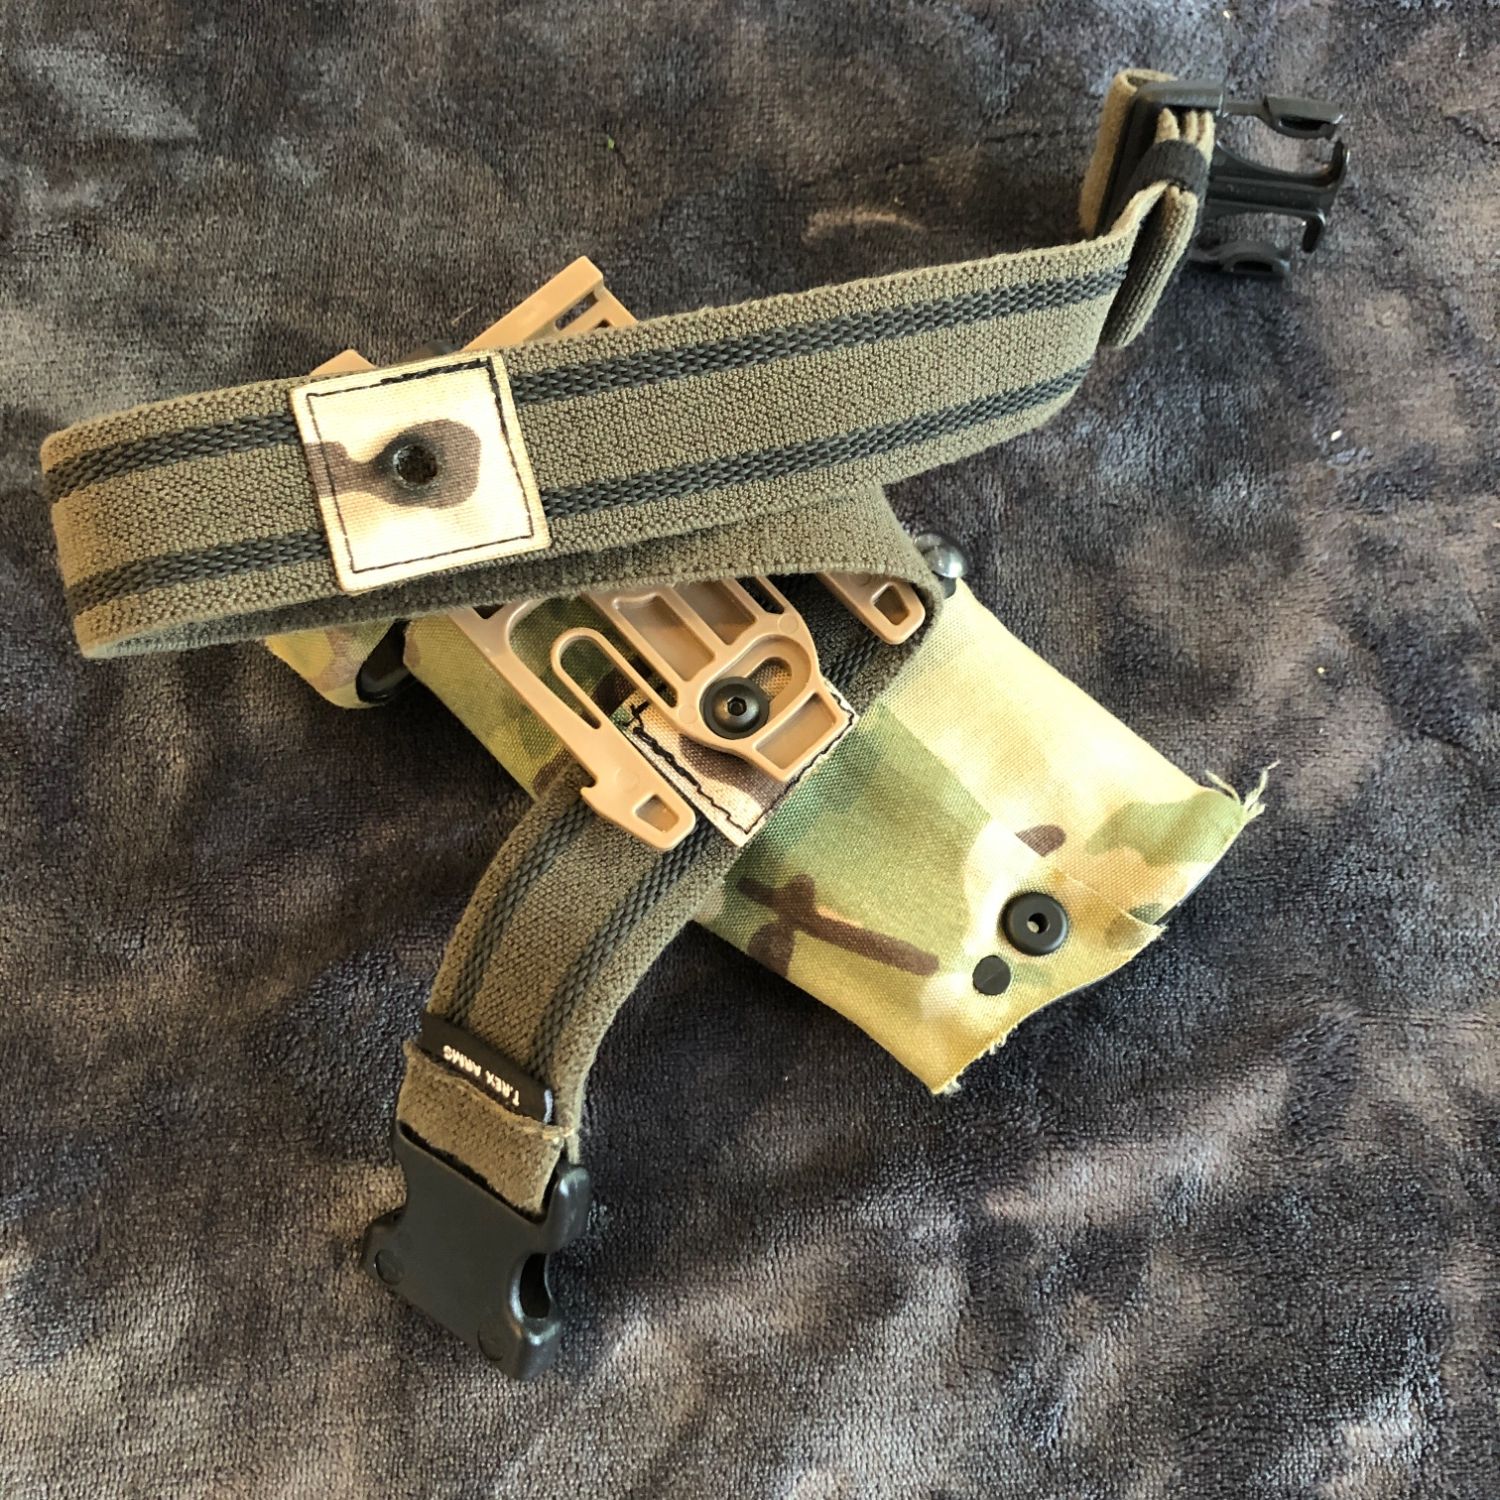 TMC holster Safariland clone for G17 - Gear - Airsoft Forums UK